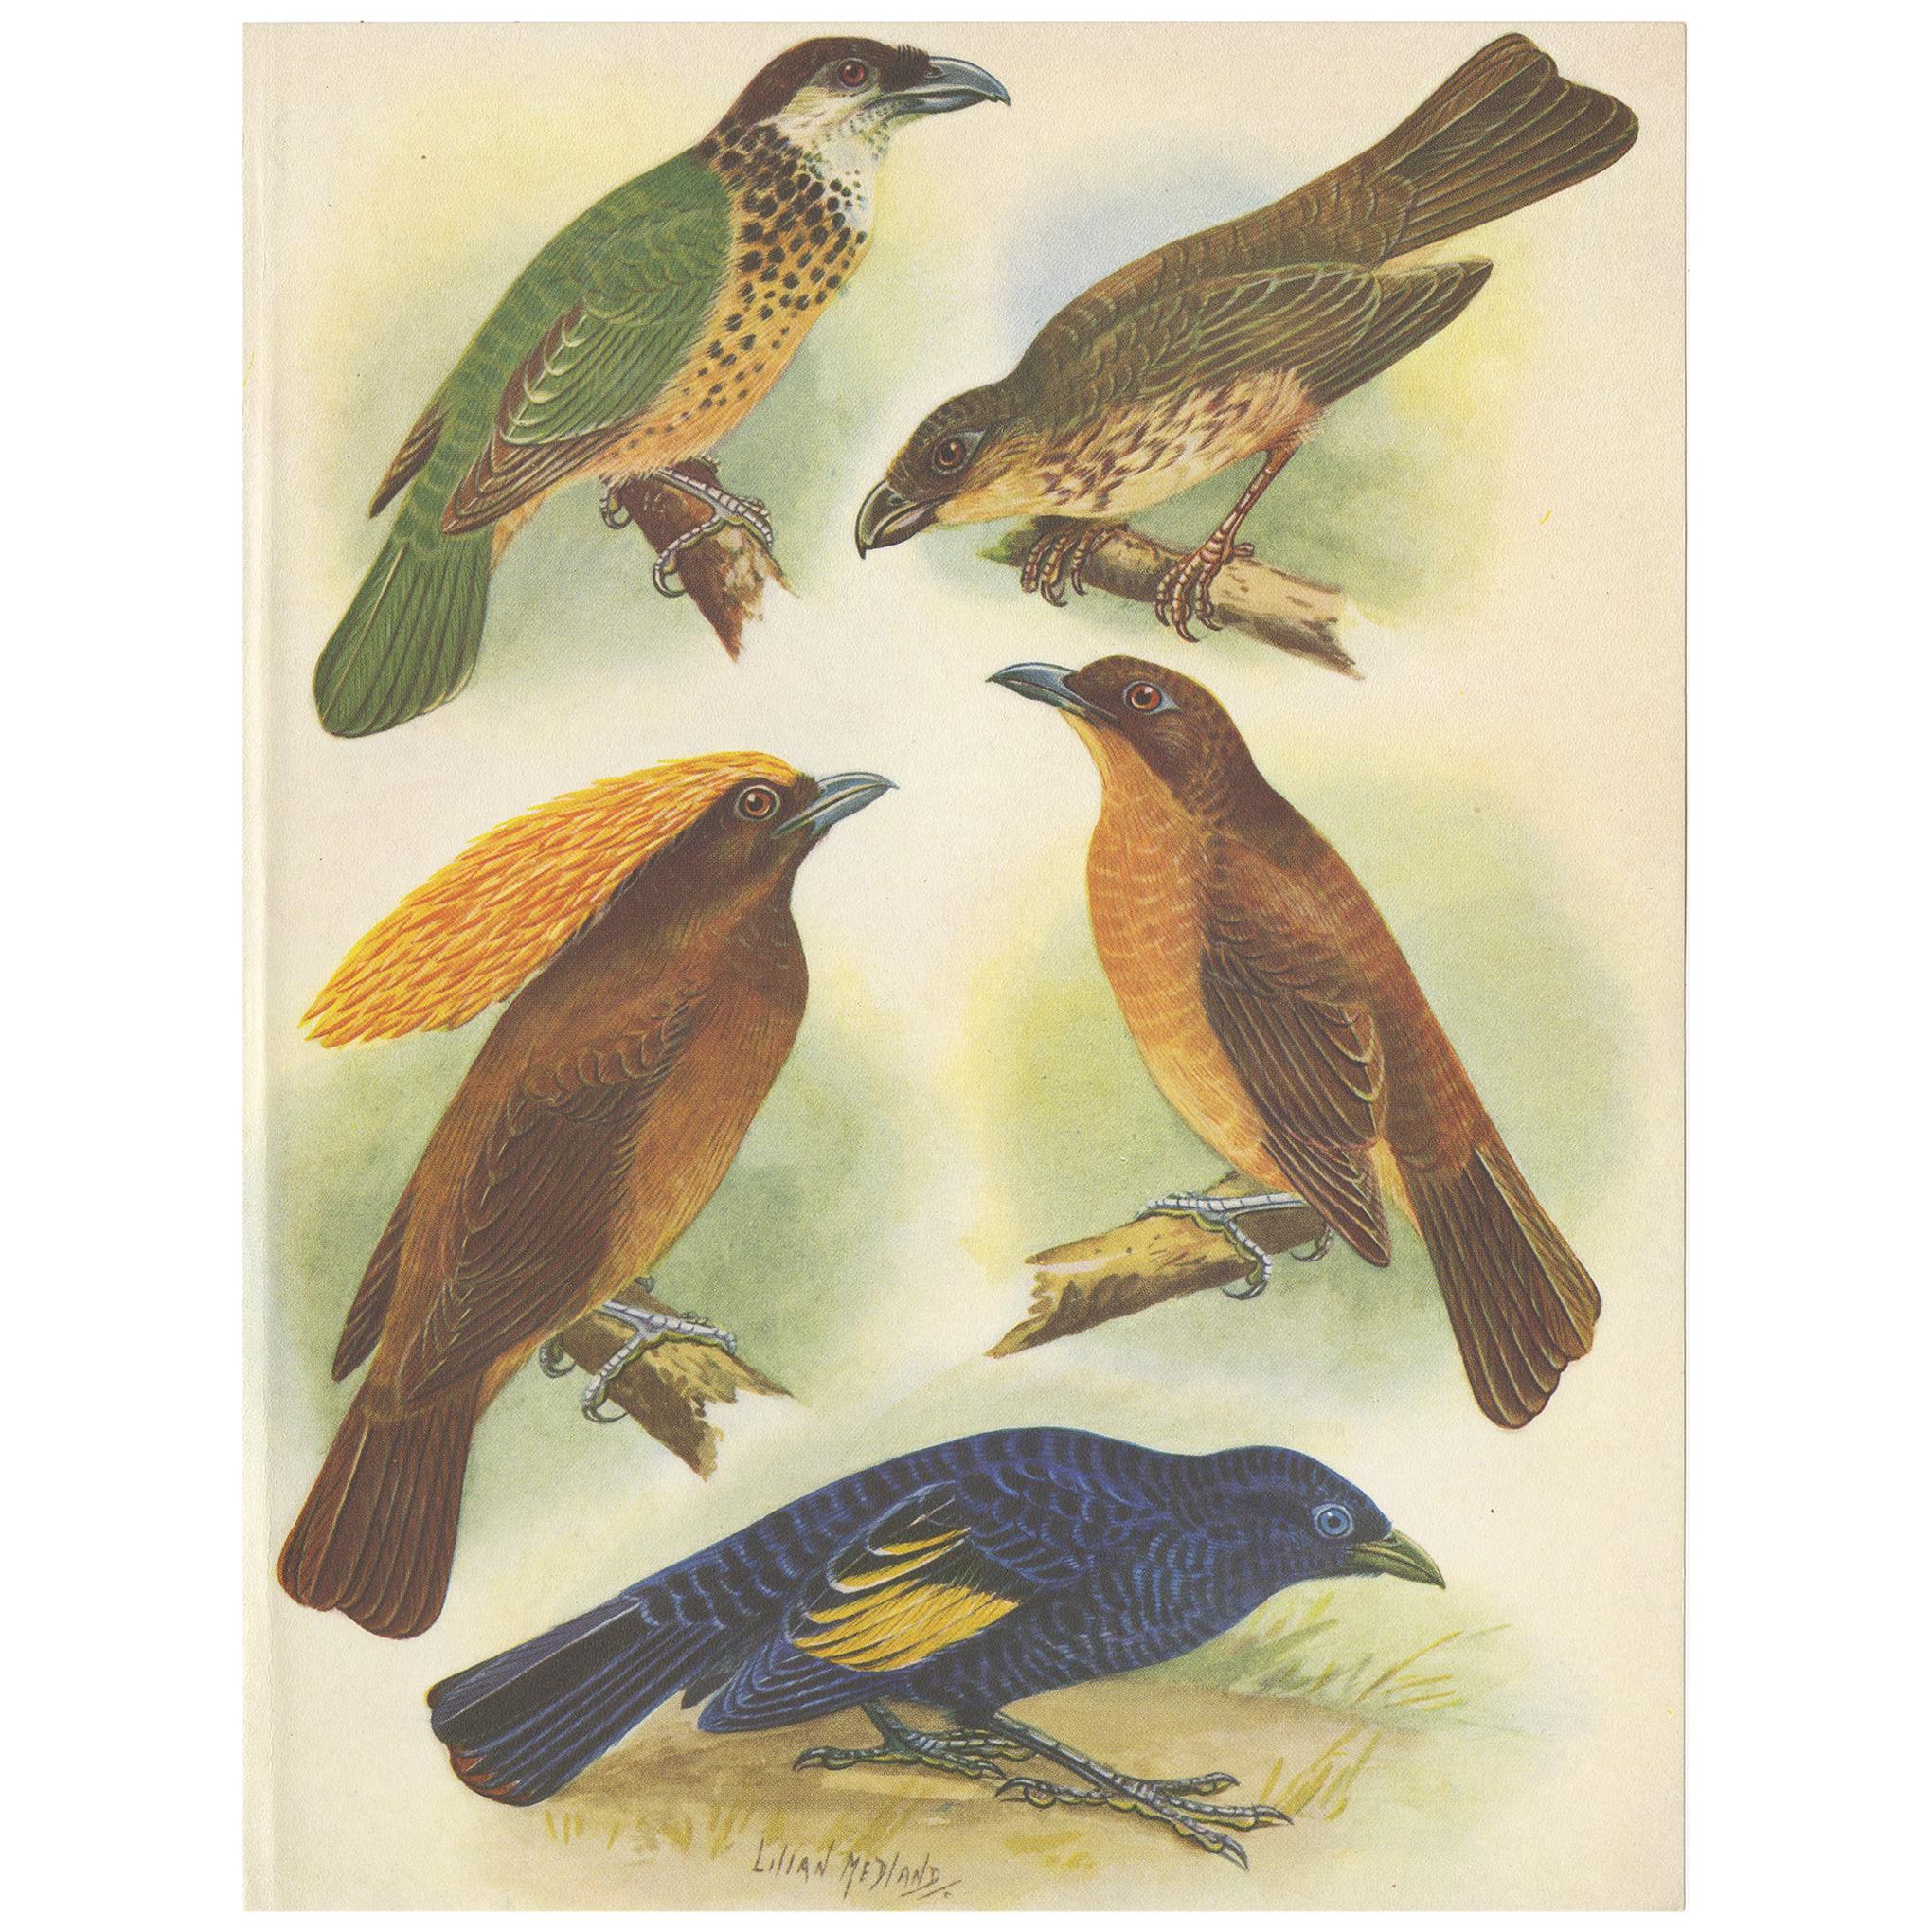 Antique Print of the White-Eared Cat Bird, Tooth-Billed Cat Bird and Other, 1950